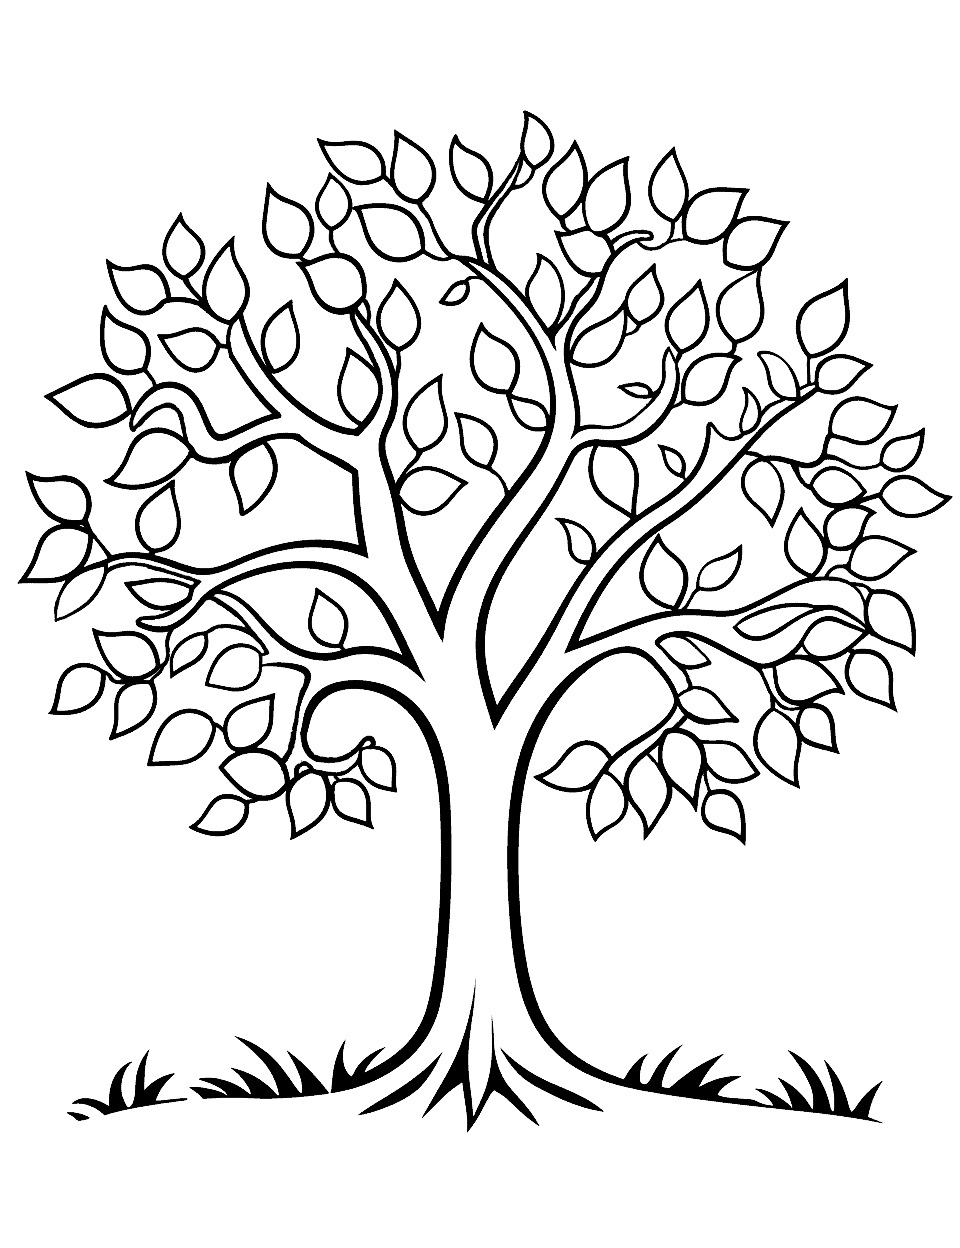 Thankful Tree Thanksgiving Coloring Page - A tree with leaves that kids can color and write on what they’re thankful for.